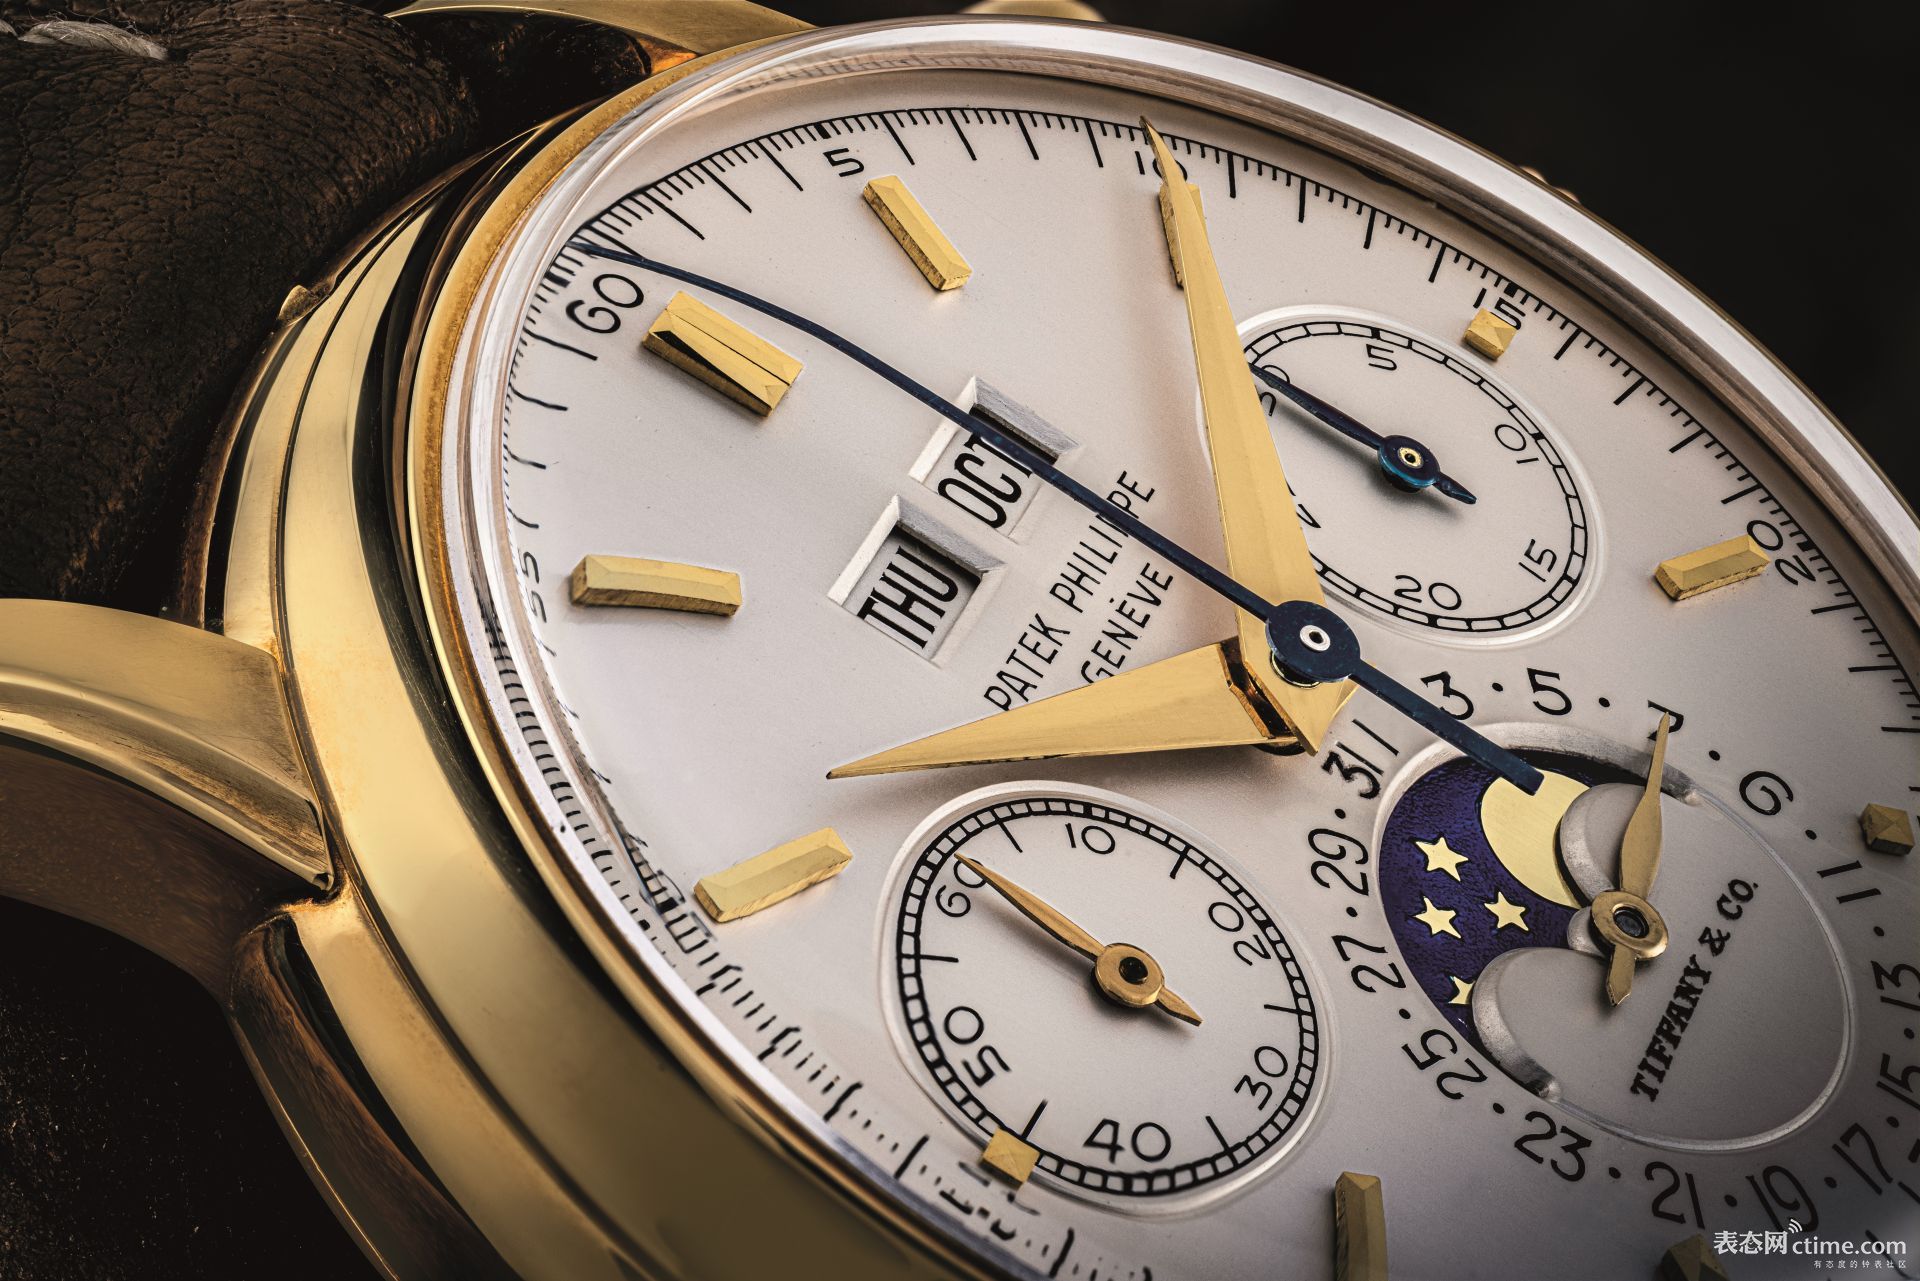 Patek-Philippe-18k-gold-perpetual-calendar-chronograph-wristwatch-with-moon-phases-retailed-by-Tiffany-Co.-ref.-249-2.jpg